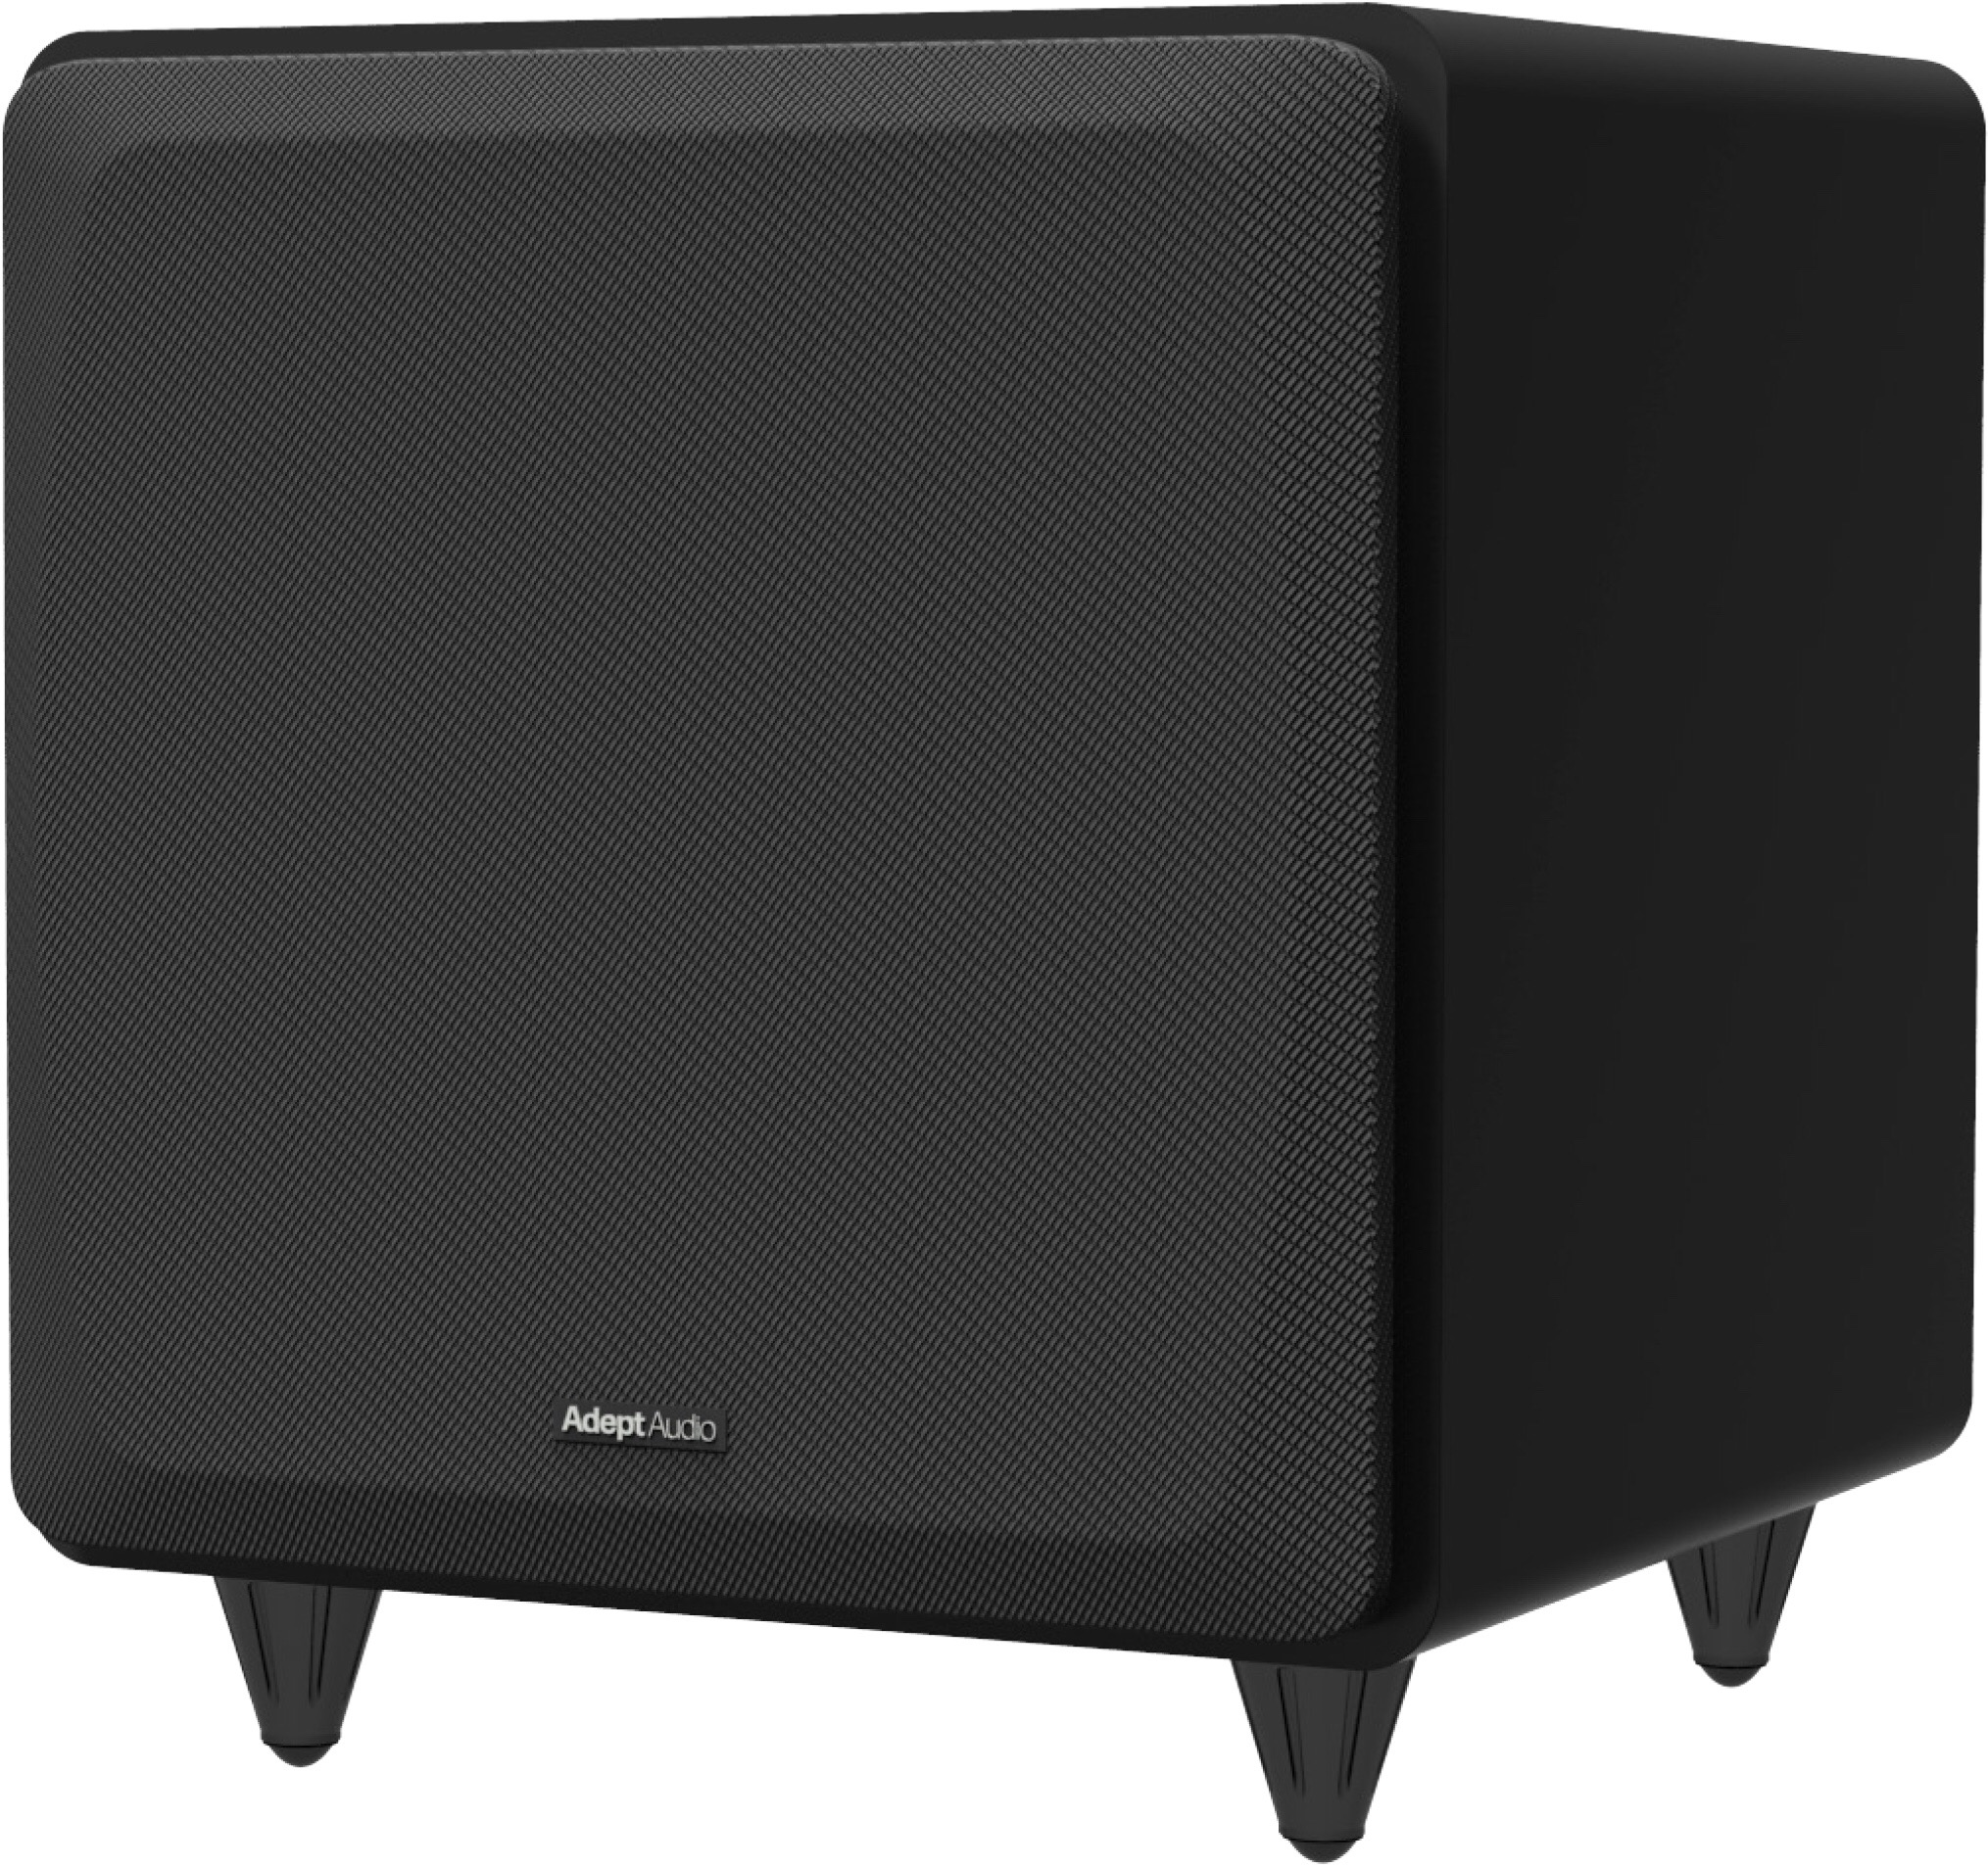 Self-Power Subwoofer (Dual Woofer 12 inch) - Adept Audio ADS12